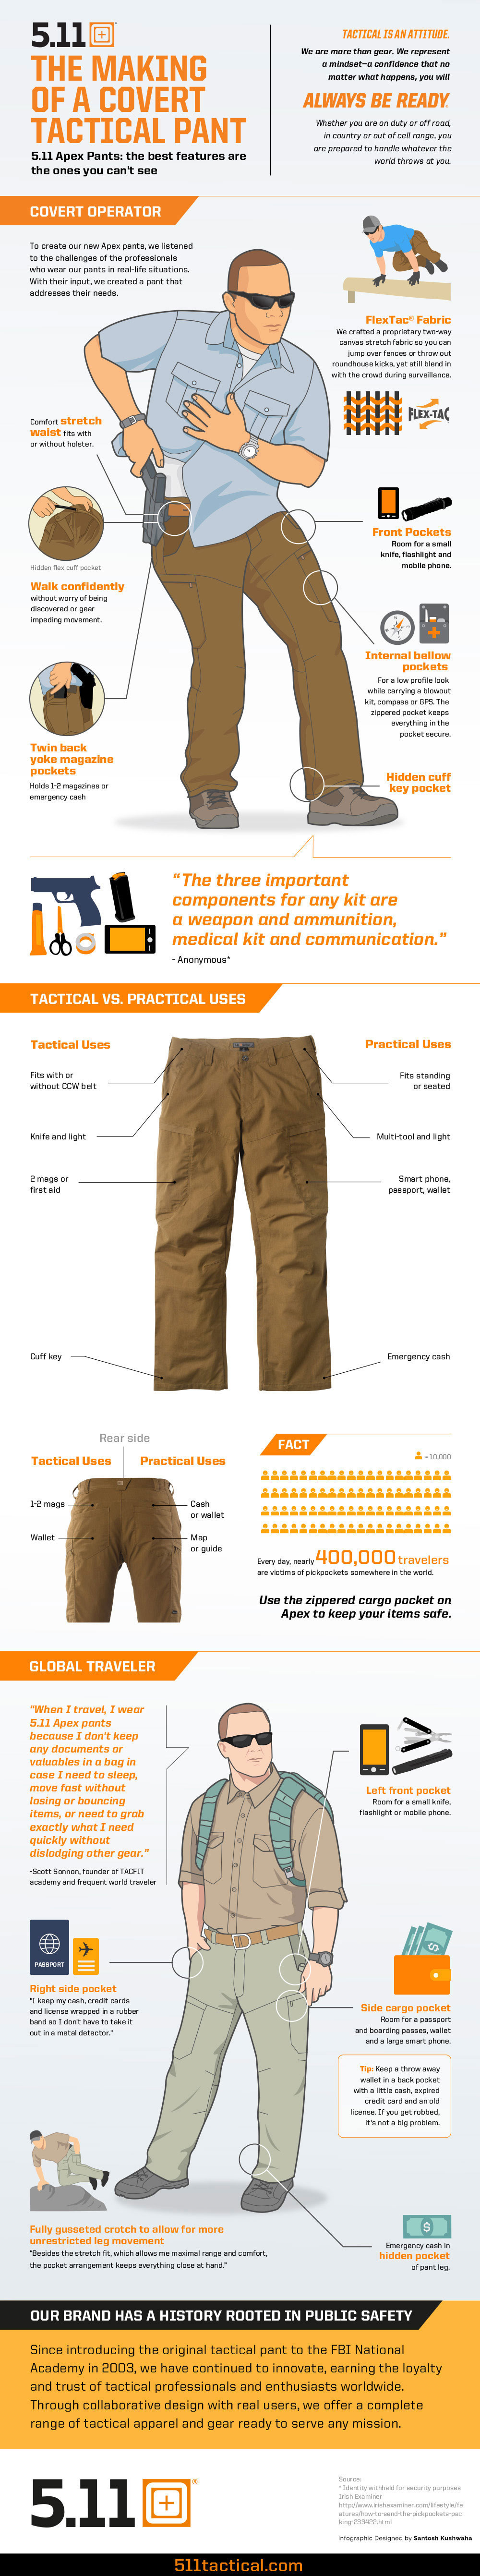 THE MAKING OF A COVERT TACTICAL PANT [INFOGRAPHIC]